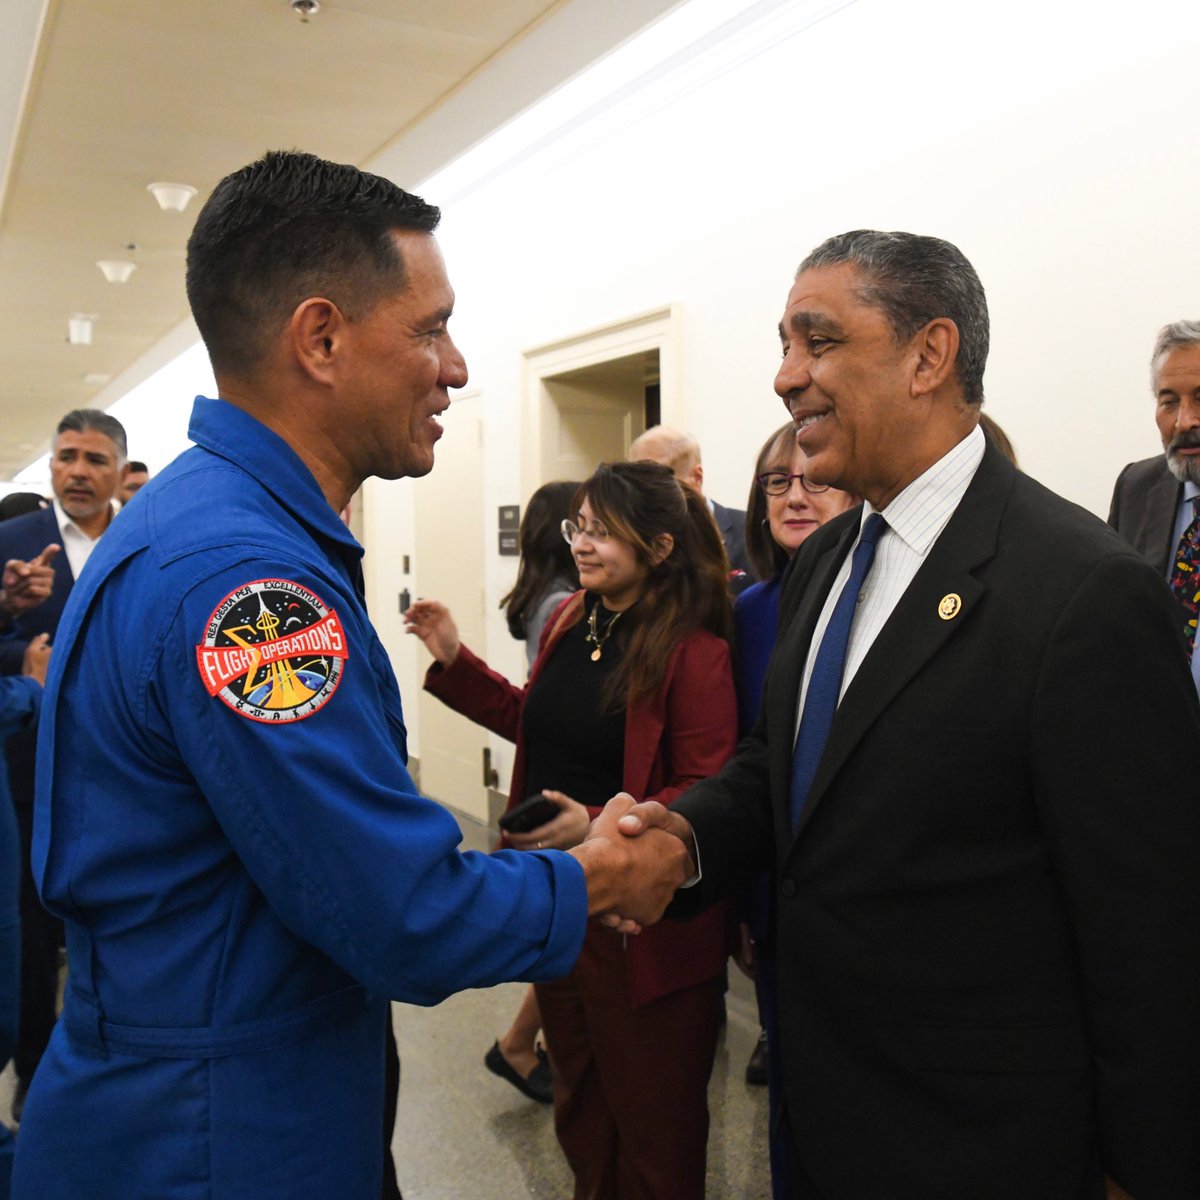 Had a great @HispanicCaucus meeting hearing from @NASA Administrator @SenBillNelson, Astronaut Frank Rubio, and the SpaceX Crew-6 about the importance of space exploration, science, and investing in the future of mankind. 🚀